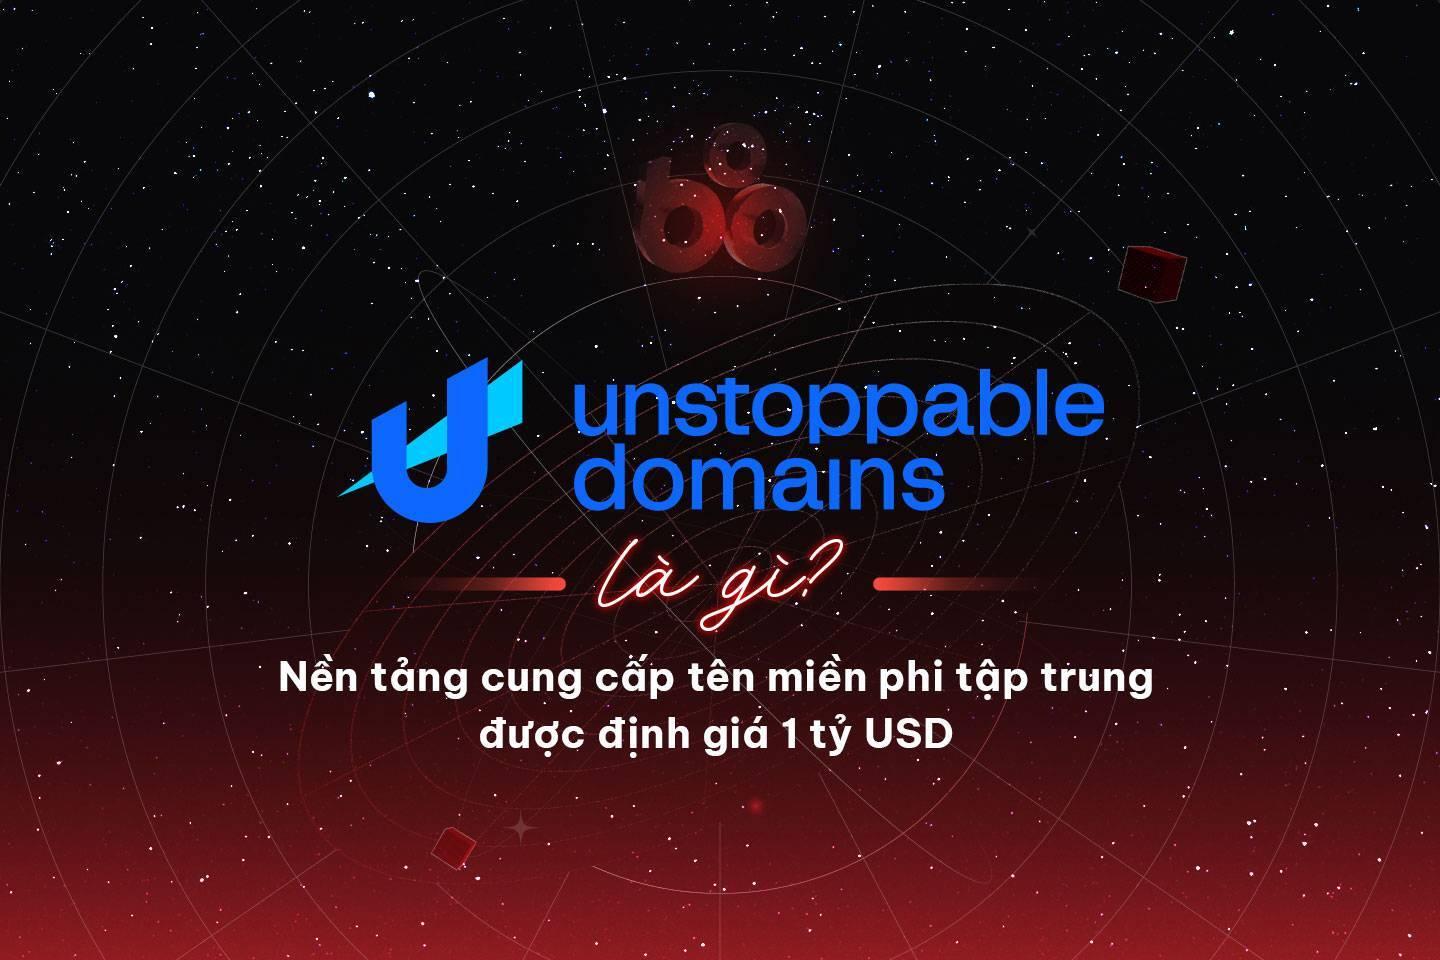 unstoppable-domains-la-gi-nen-tang-cung-cap-ten-mien-phi-tap-trung-duoc-dinh-gia-1-ty-usd